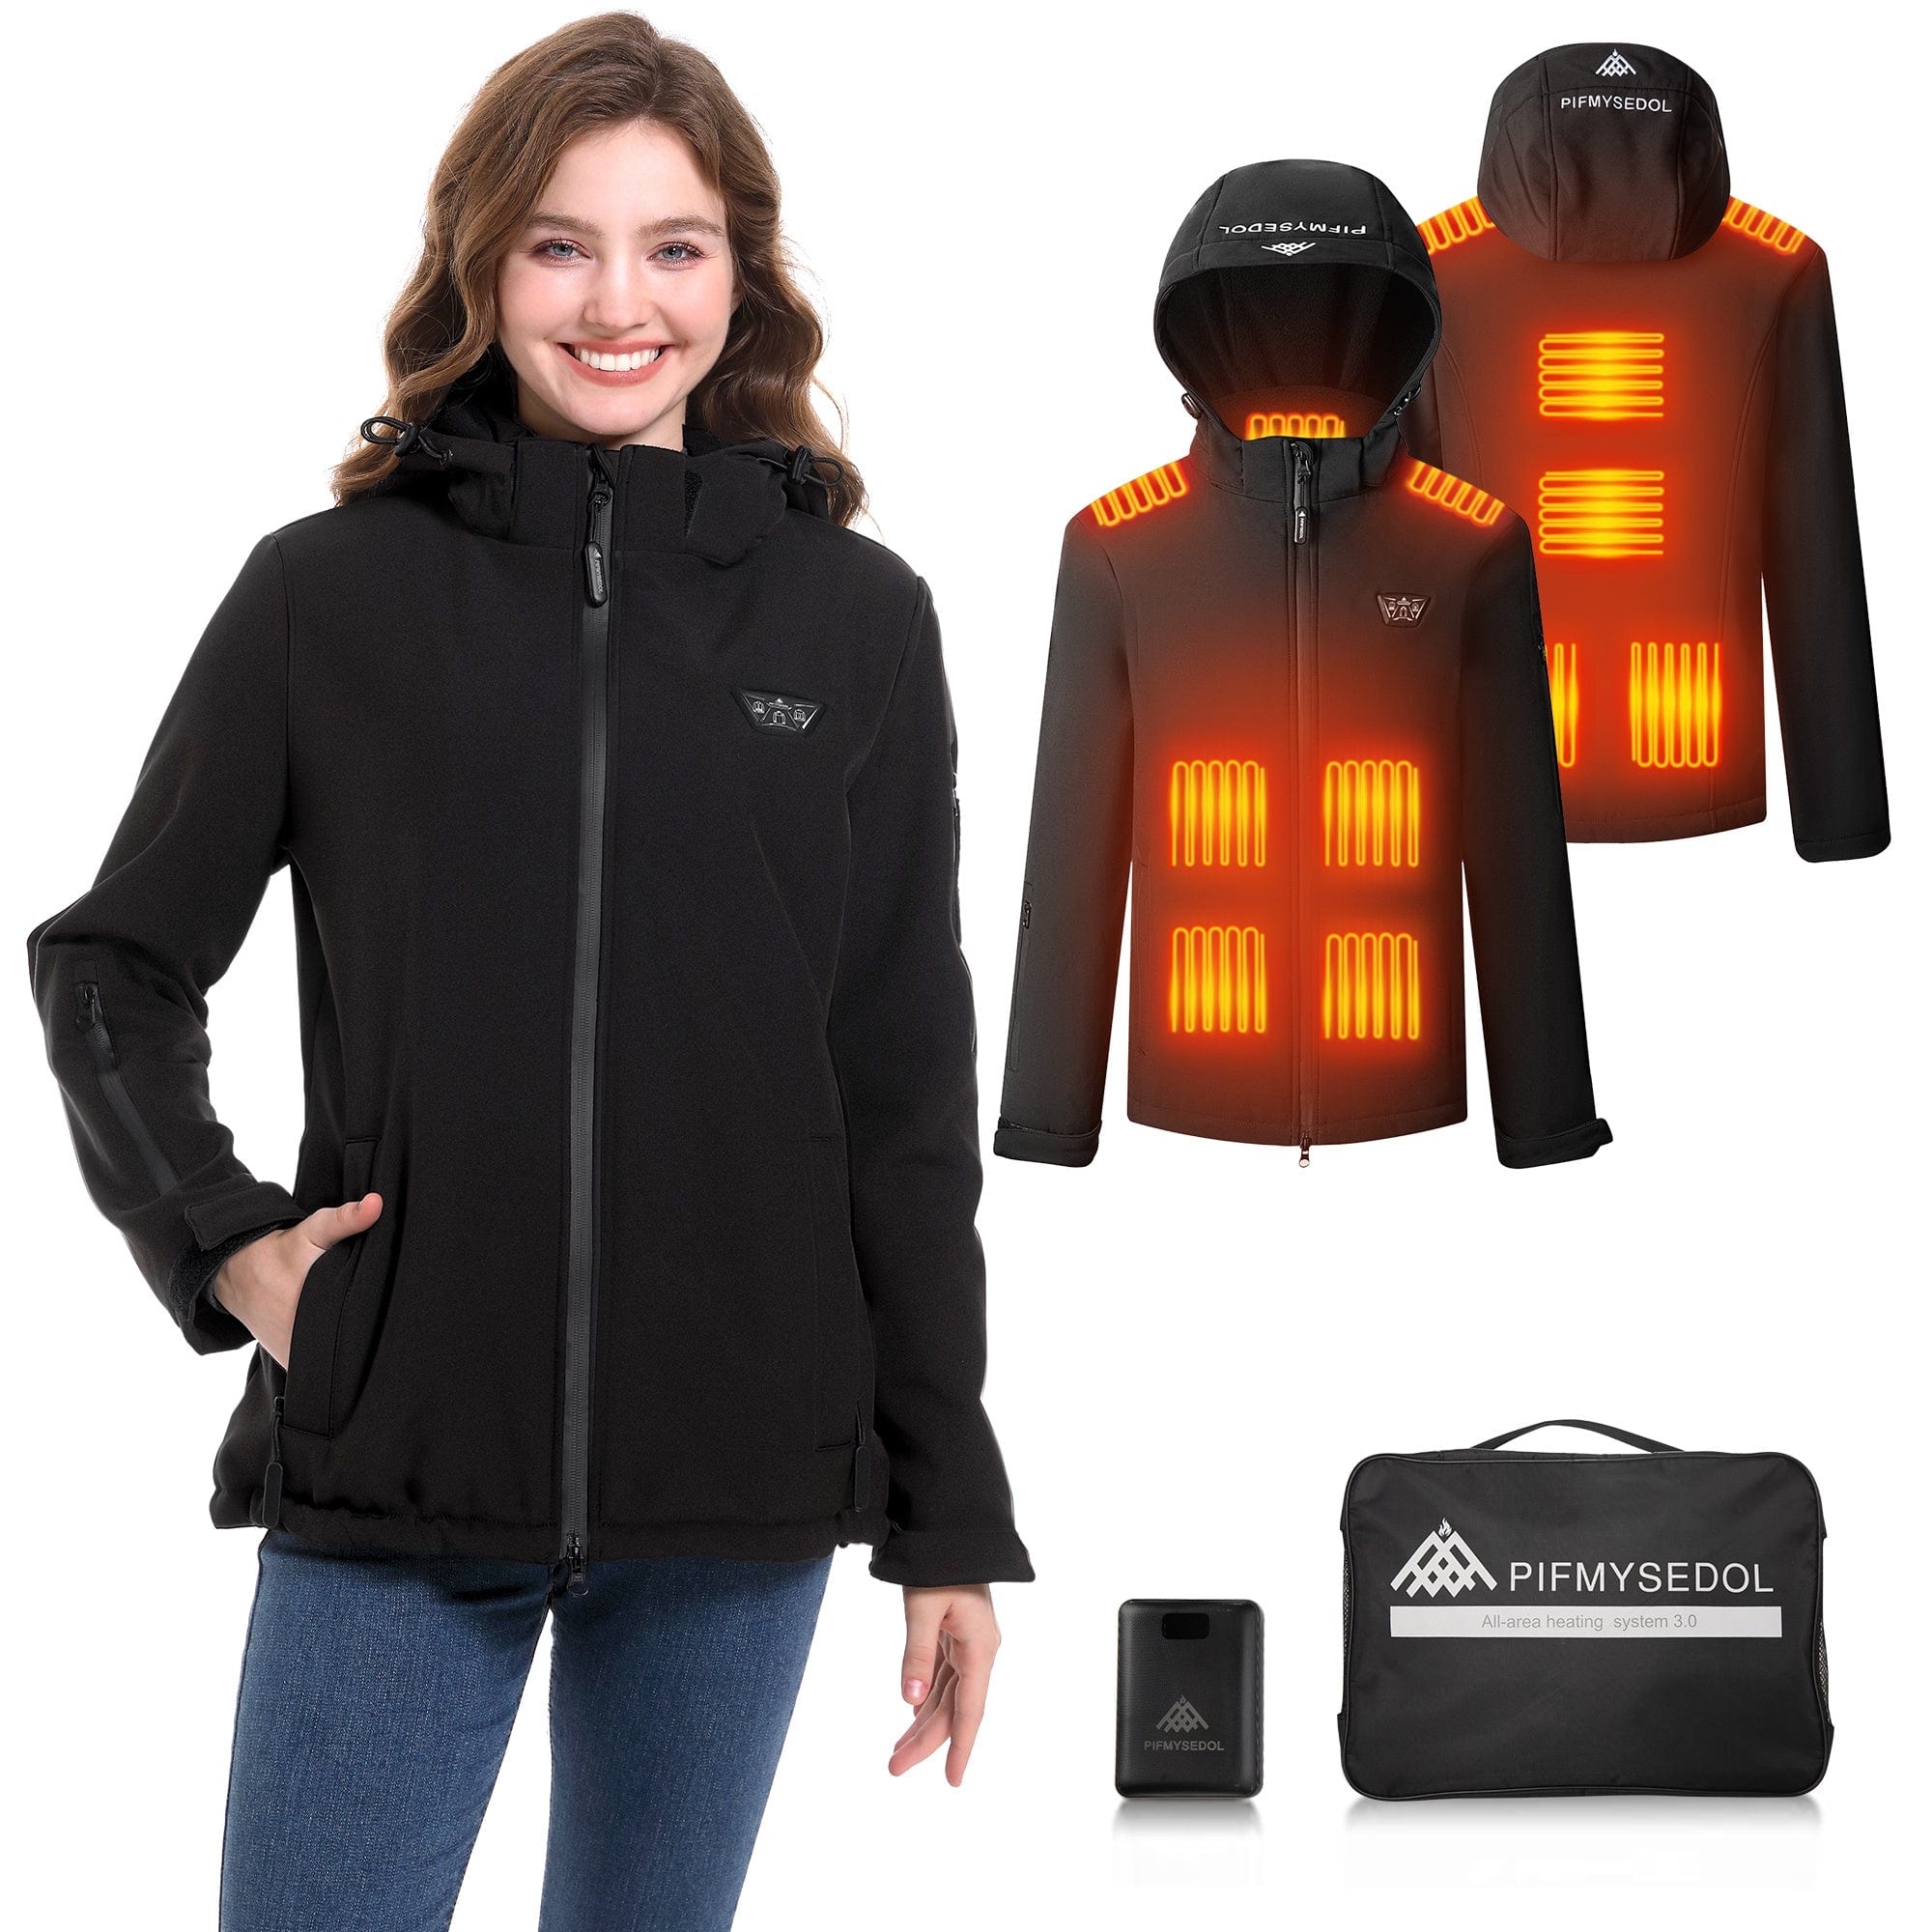 Women's Heated Jacket With Battery Pack, Outdoor Sports Heated Jackets For Women In Black - Size S